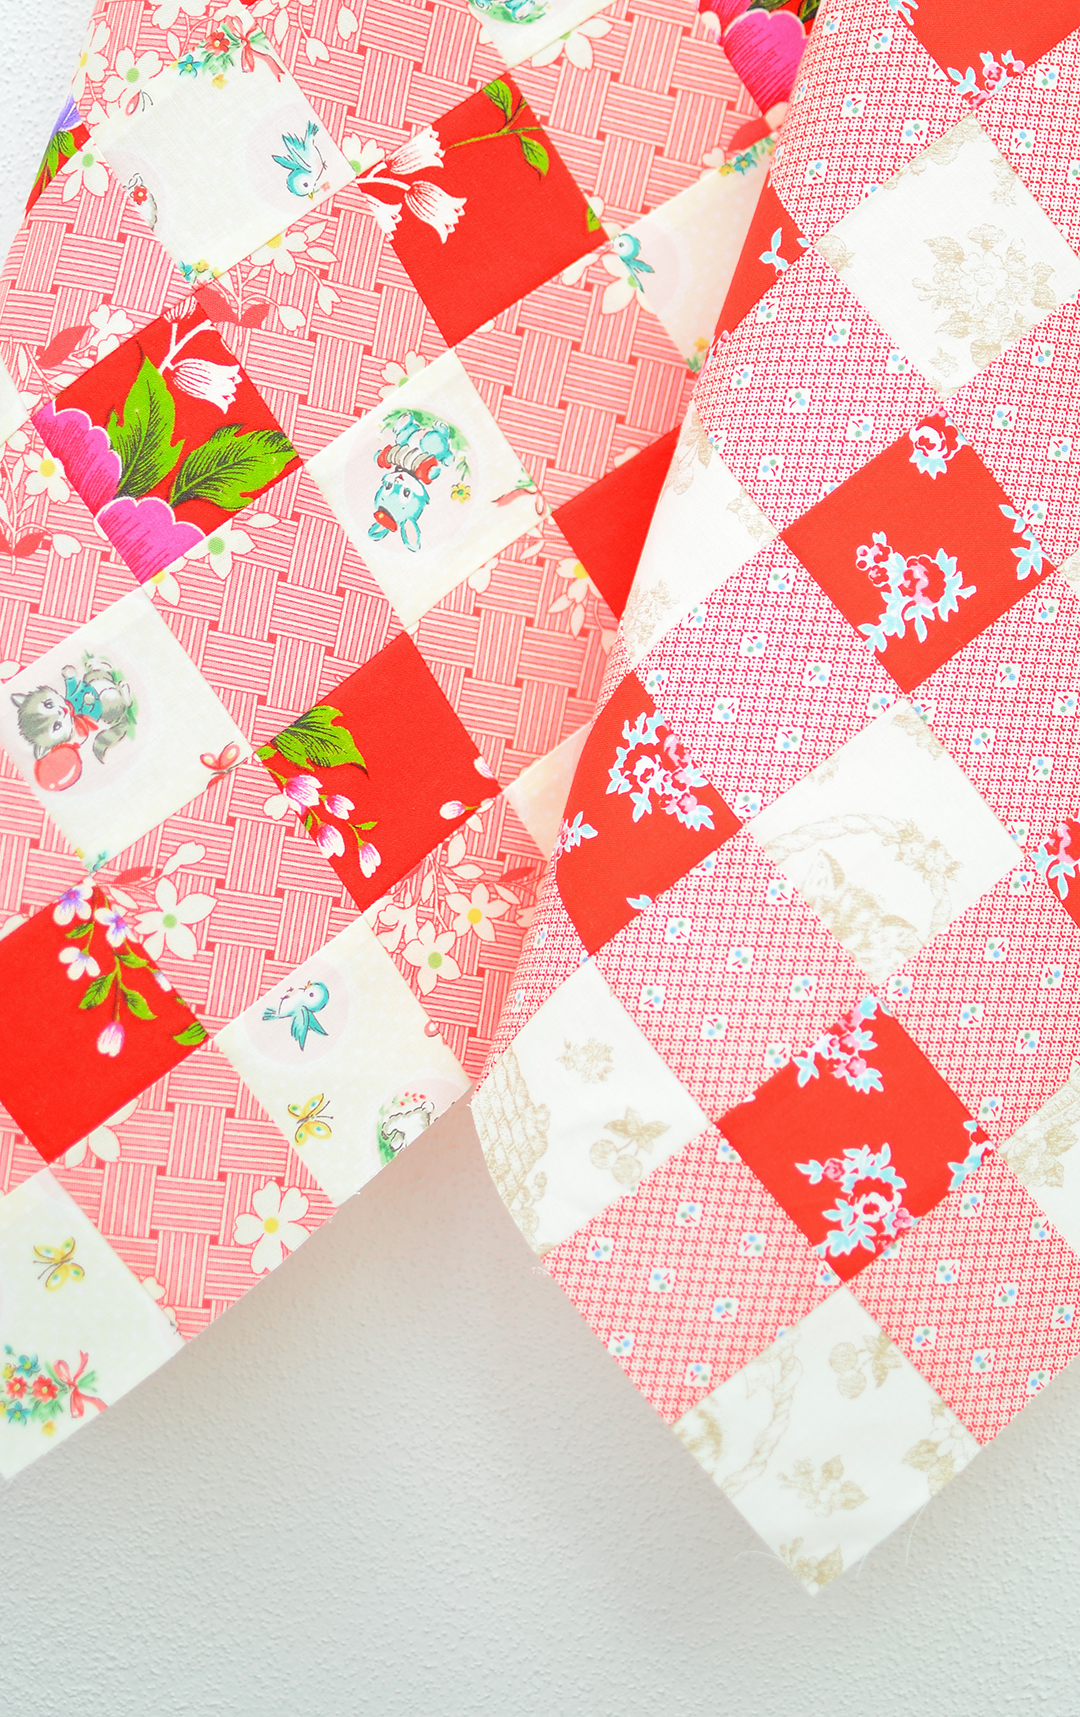 Picnic quilt blocks in red